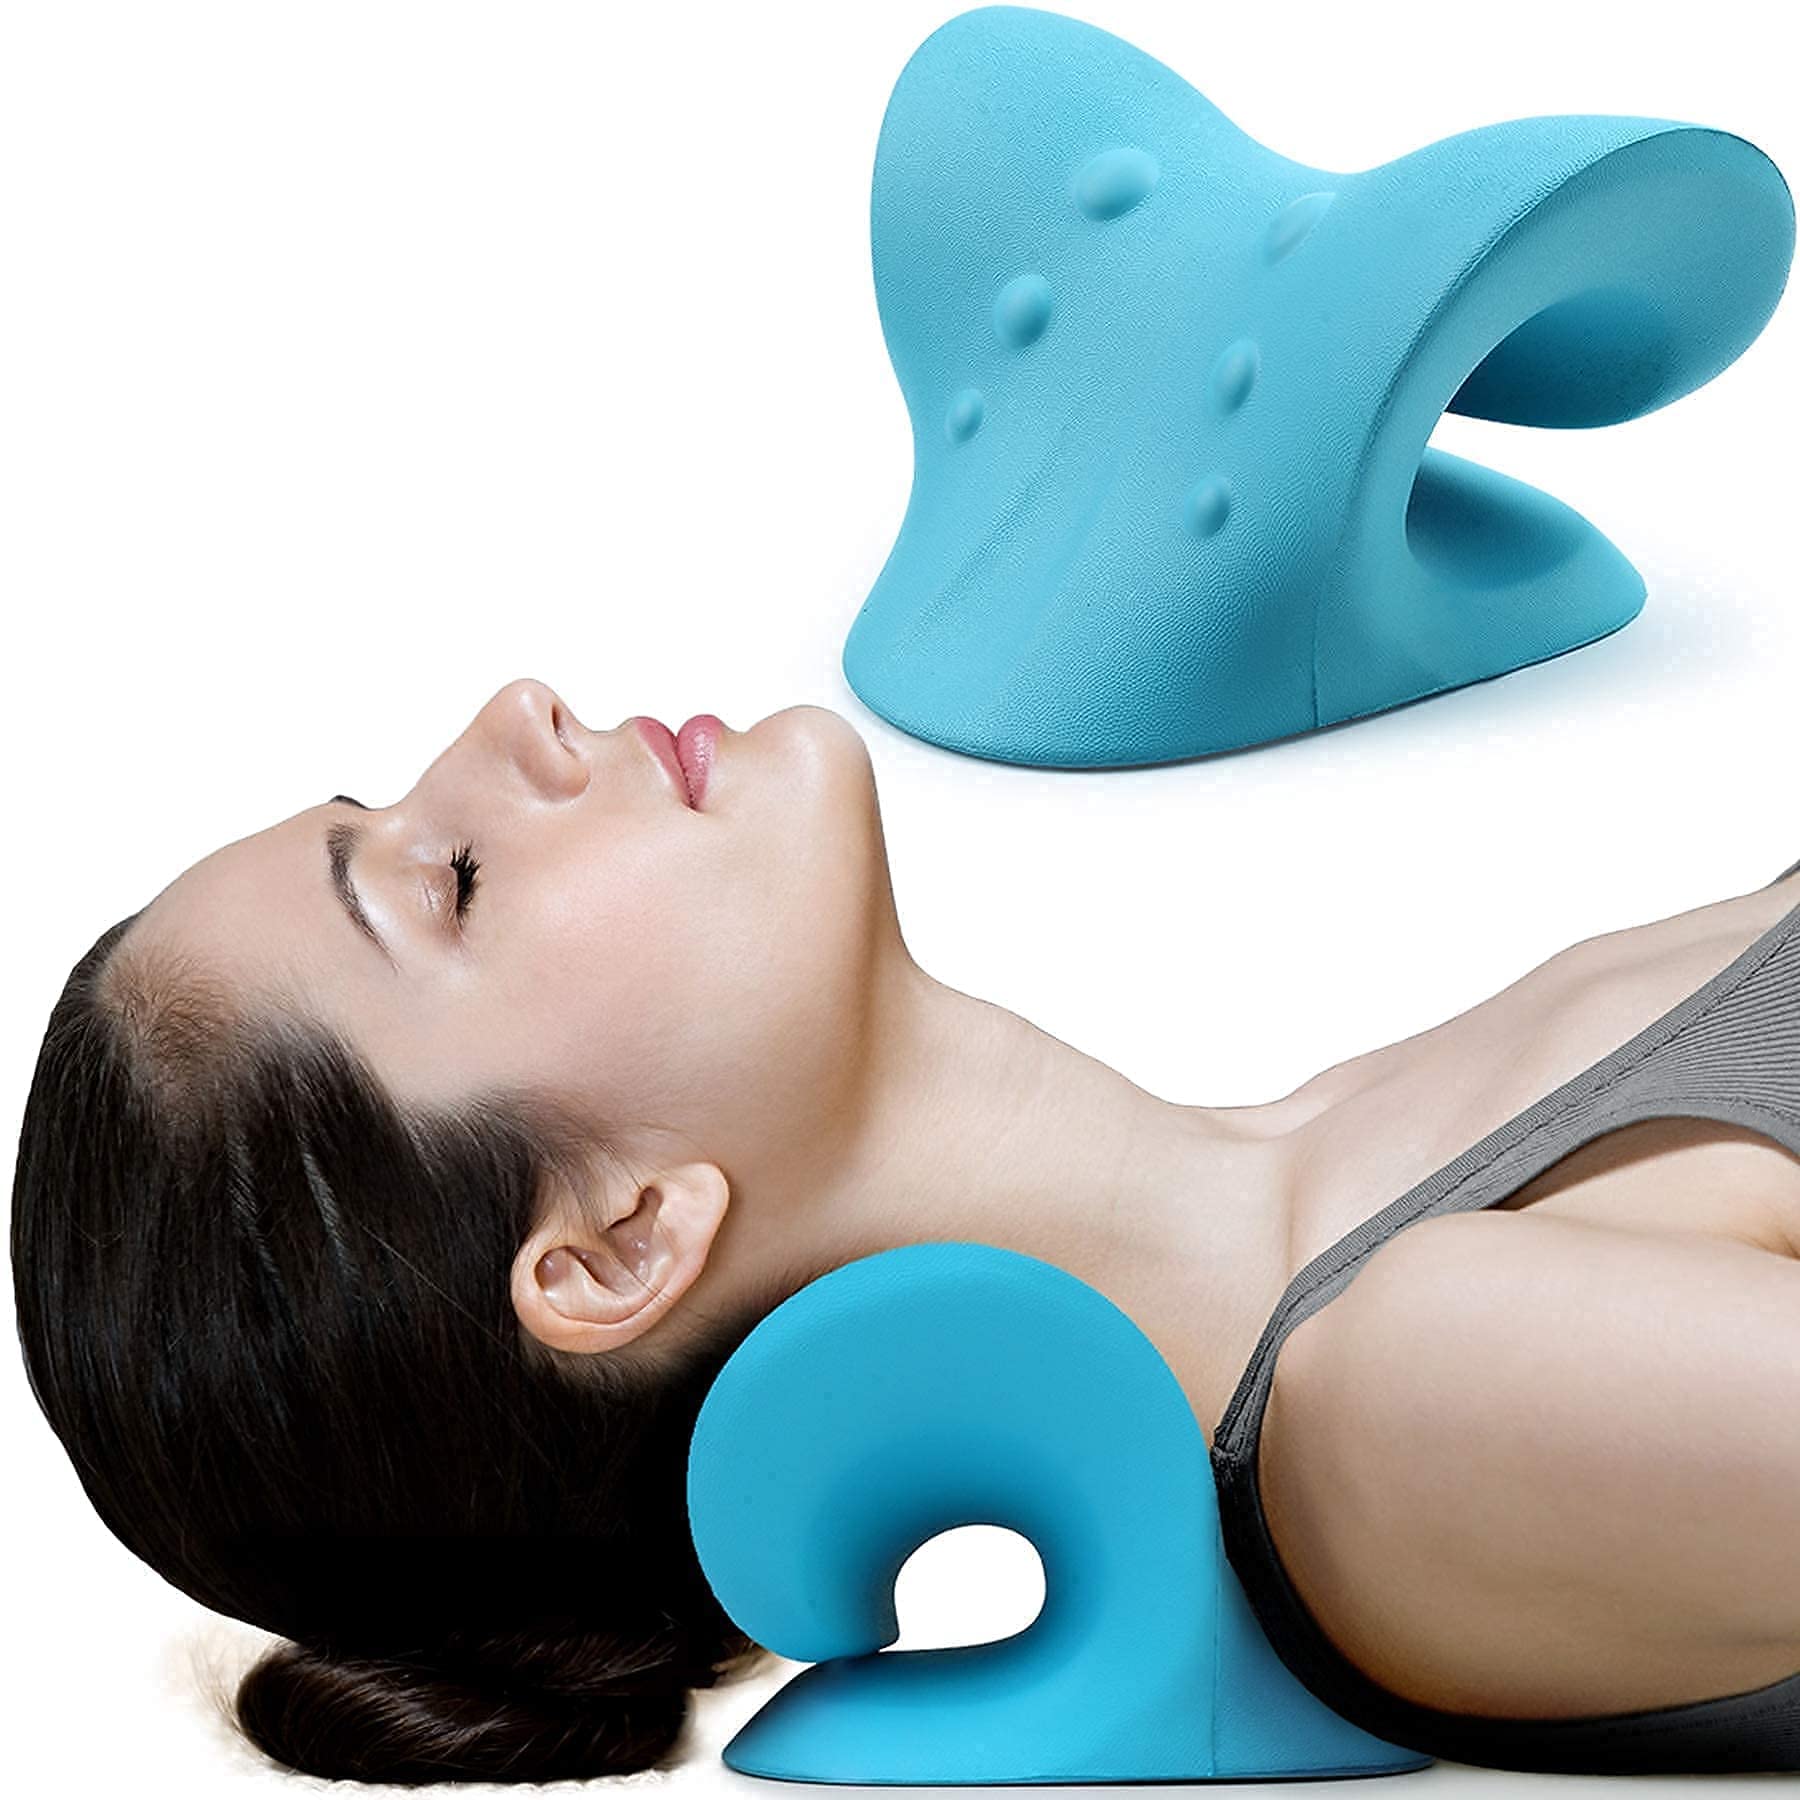 Neck Stretcher Cervical Traction Device for Neck Pain Relief and Back Stretcher for Lower Back Pain Relief Lumbar Support Bundle